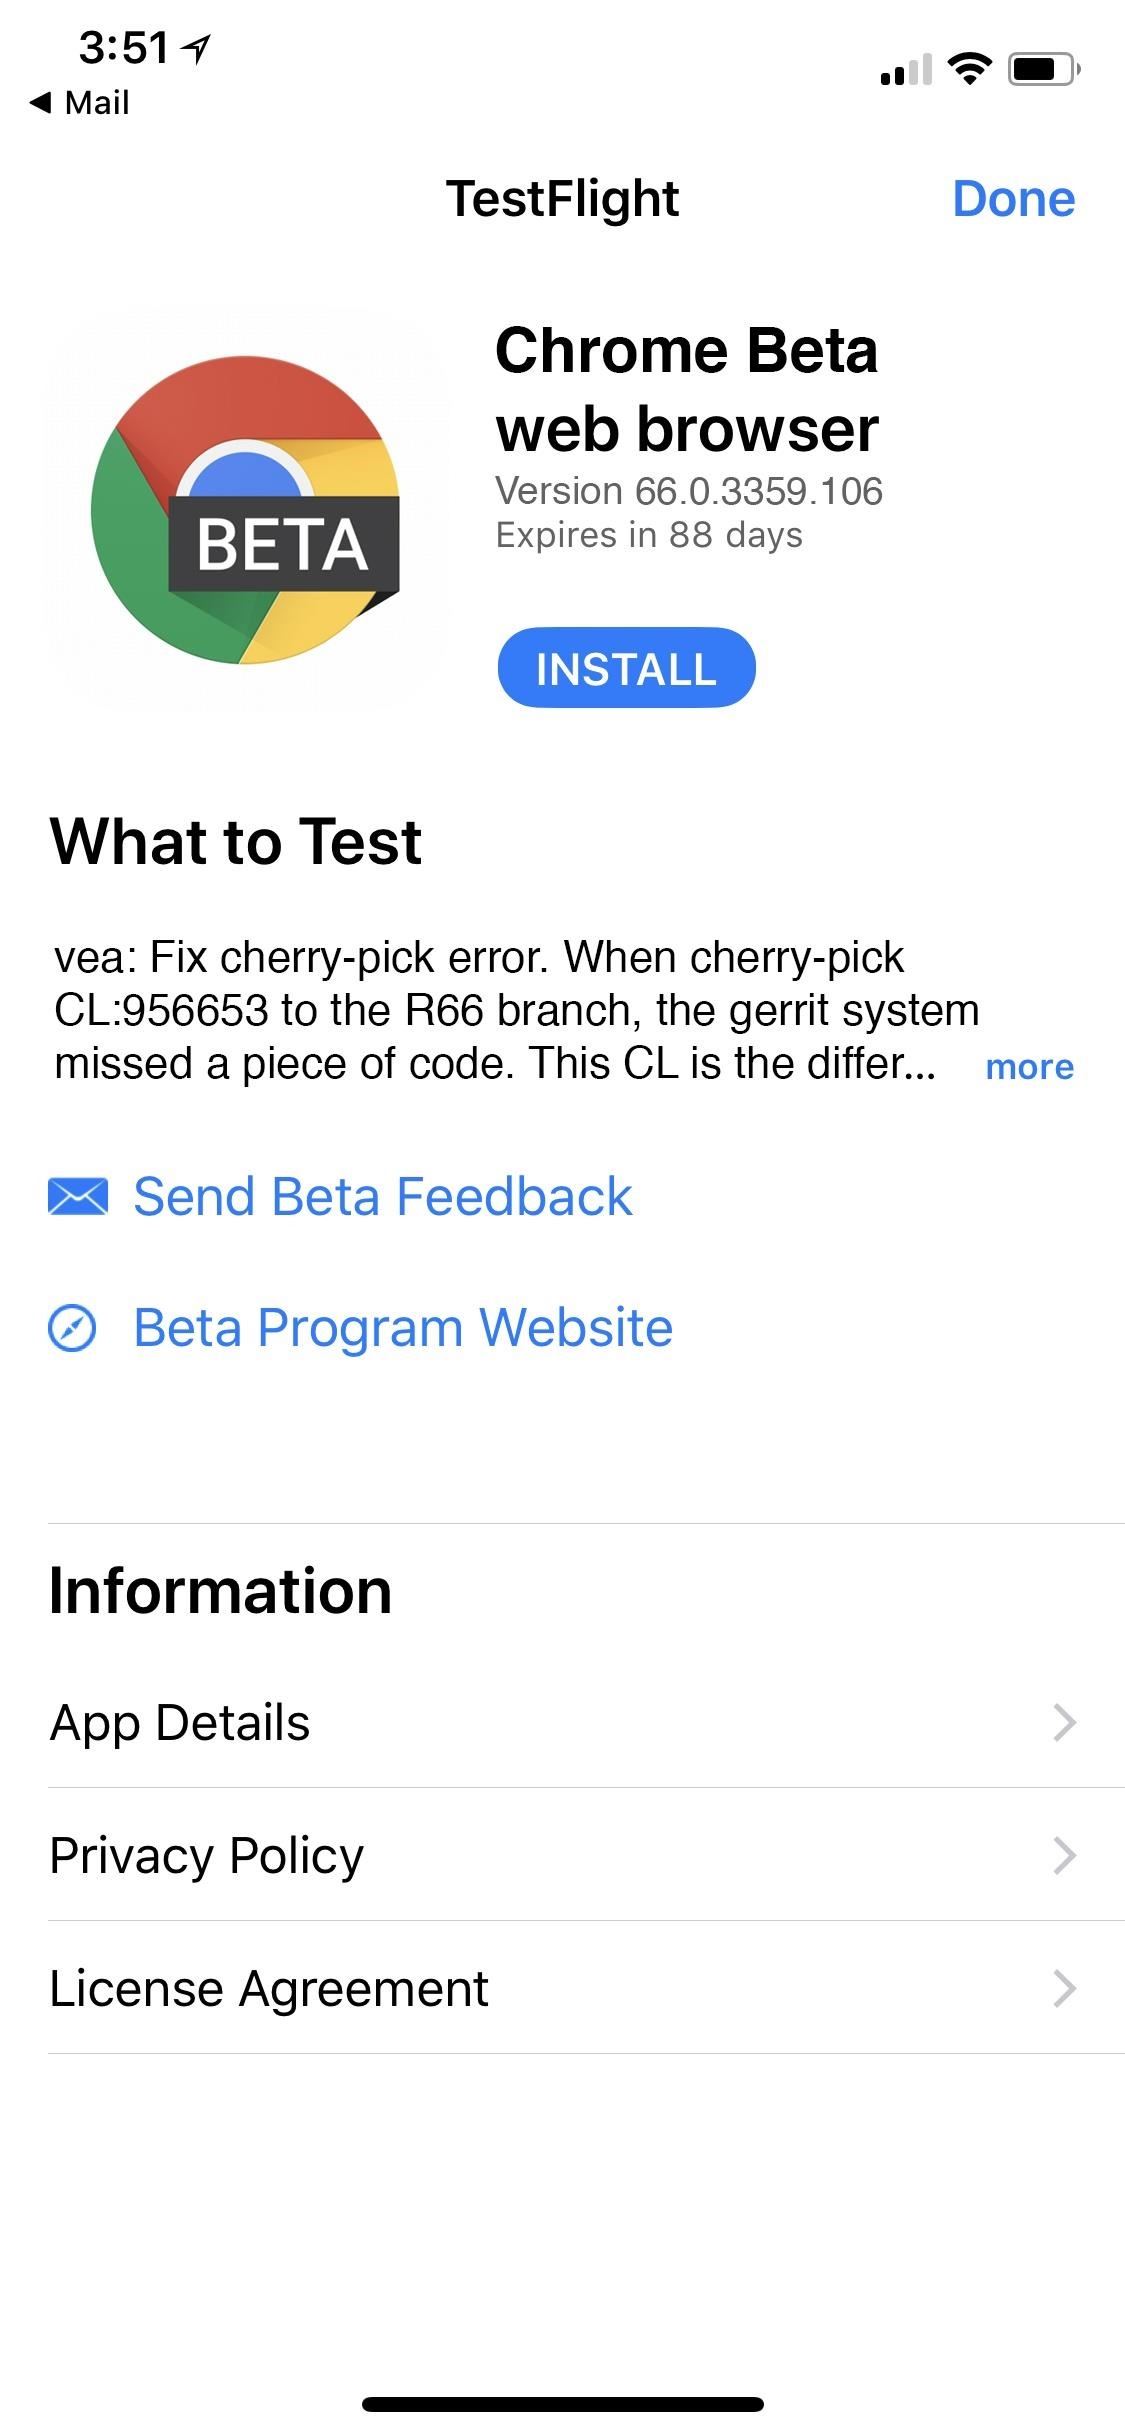 Google Chrome 101: How to Install the Beta Browser on iPhone & Android